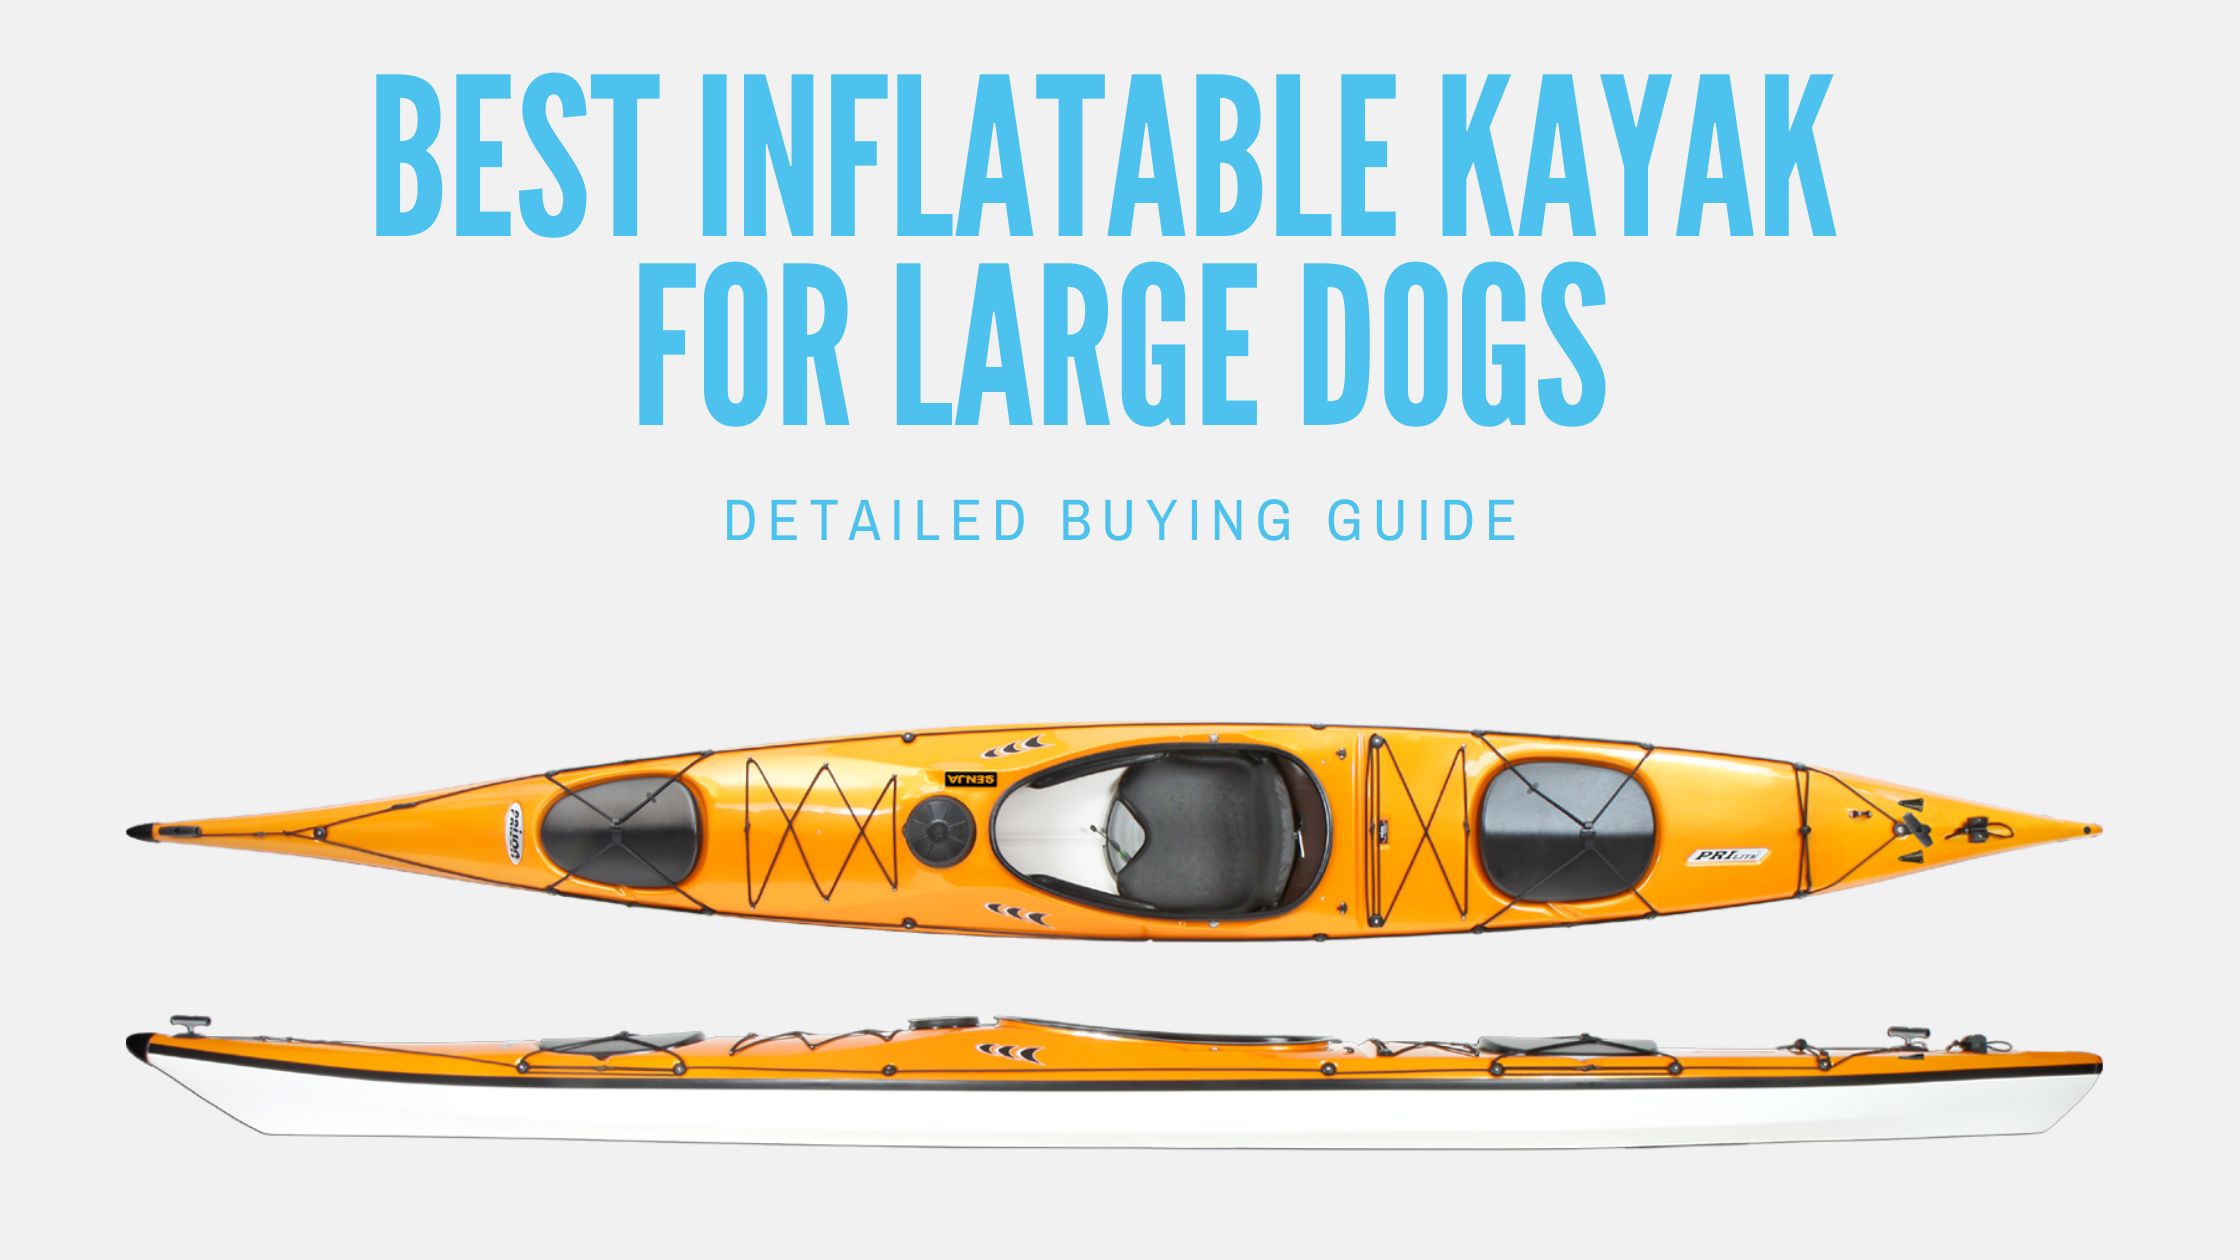 10 Best Inflatable Kayak for Large Dogs